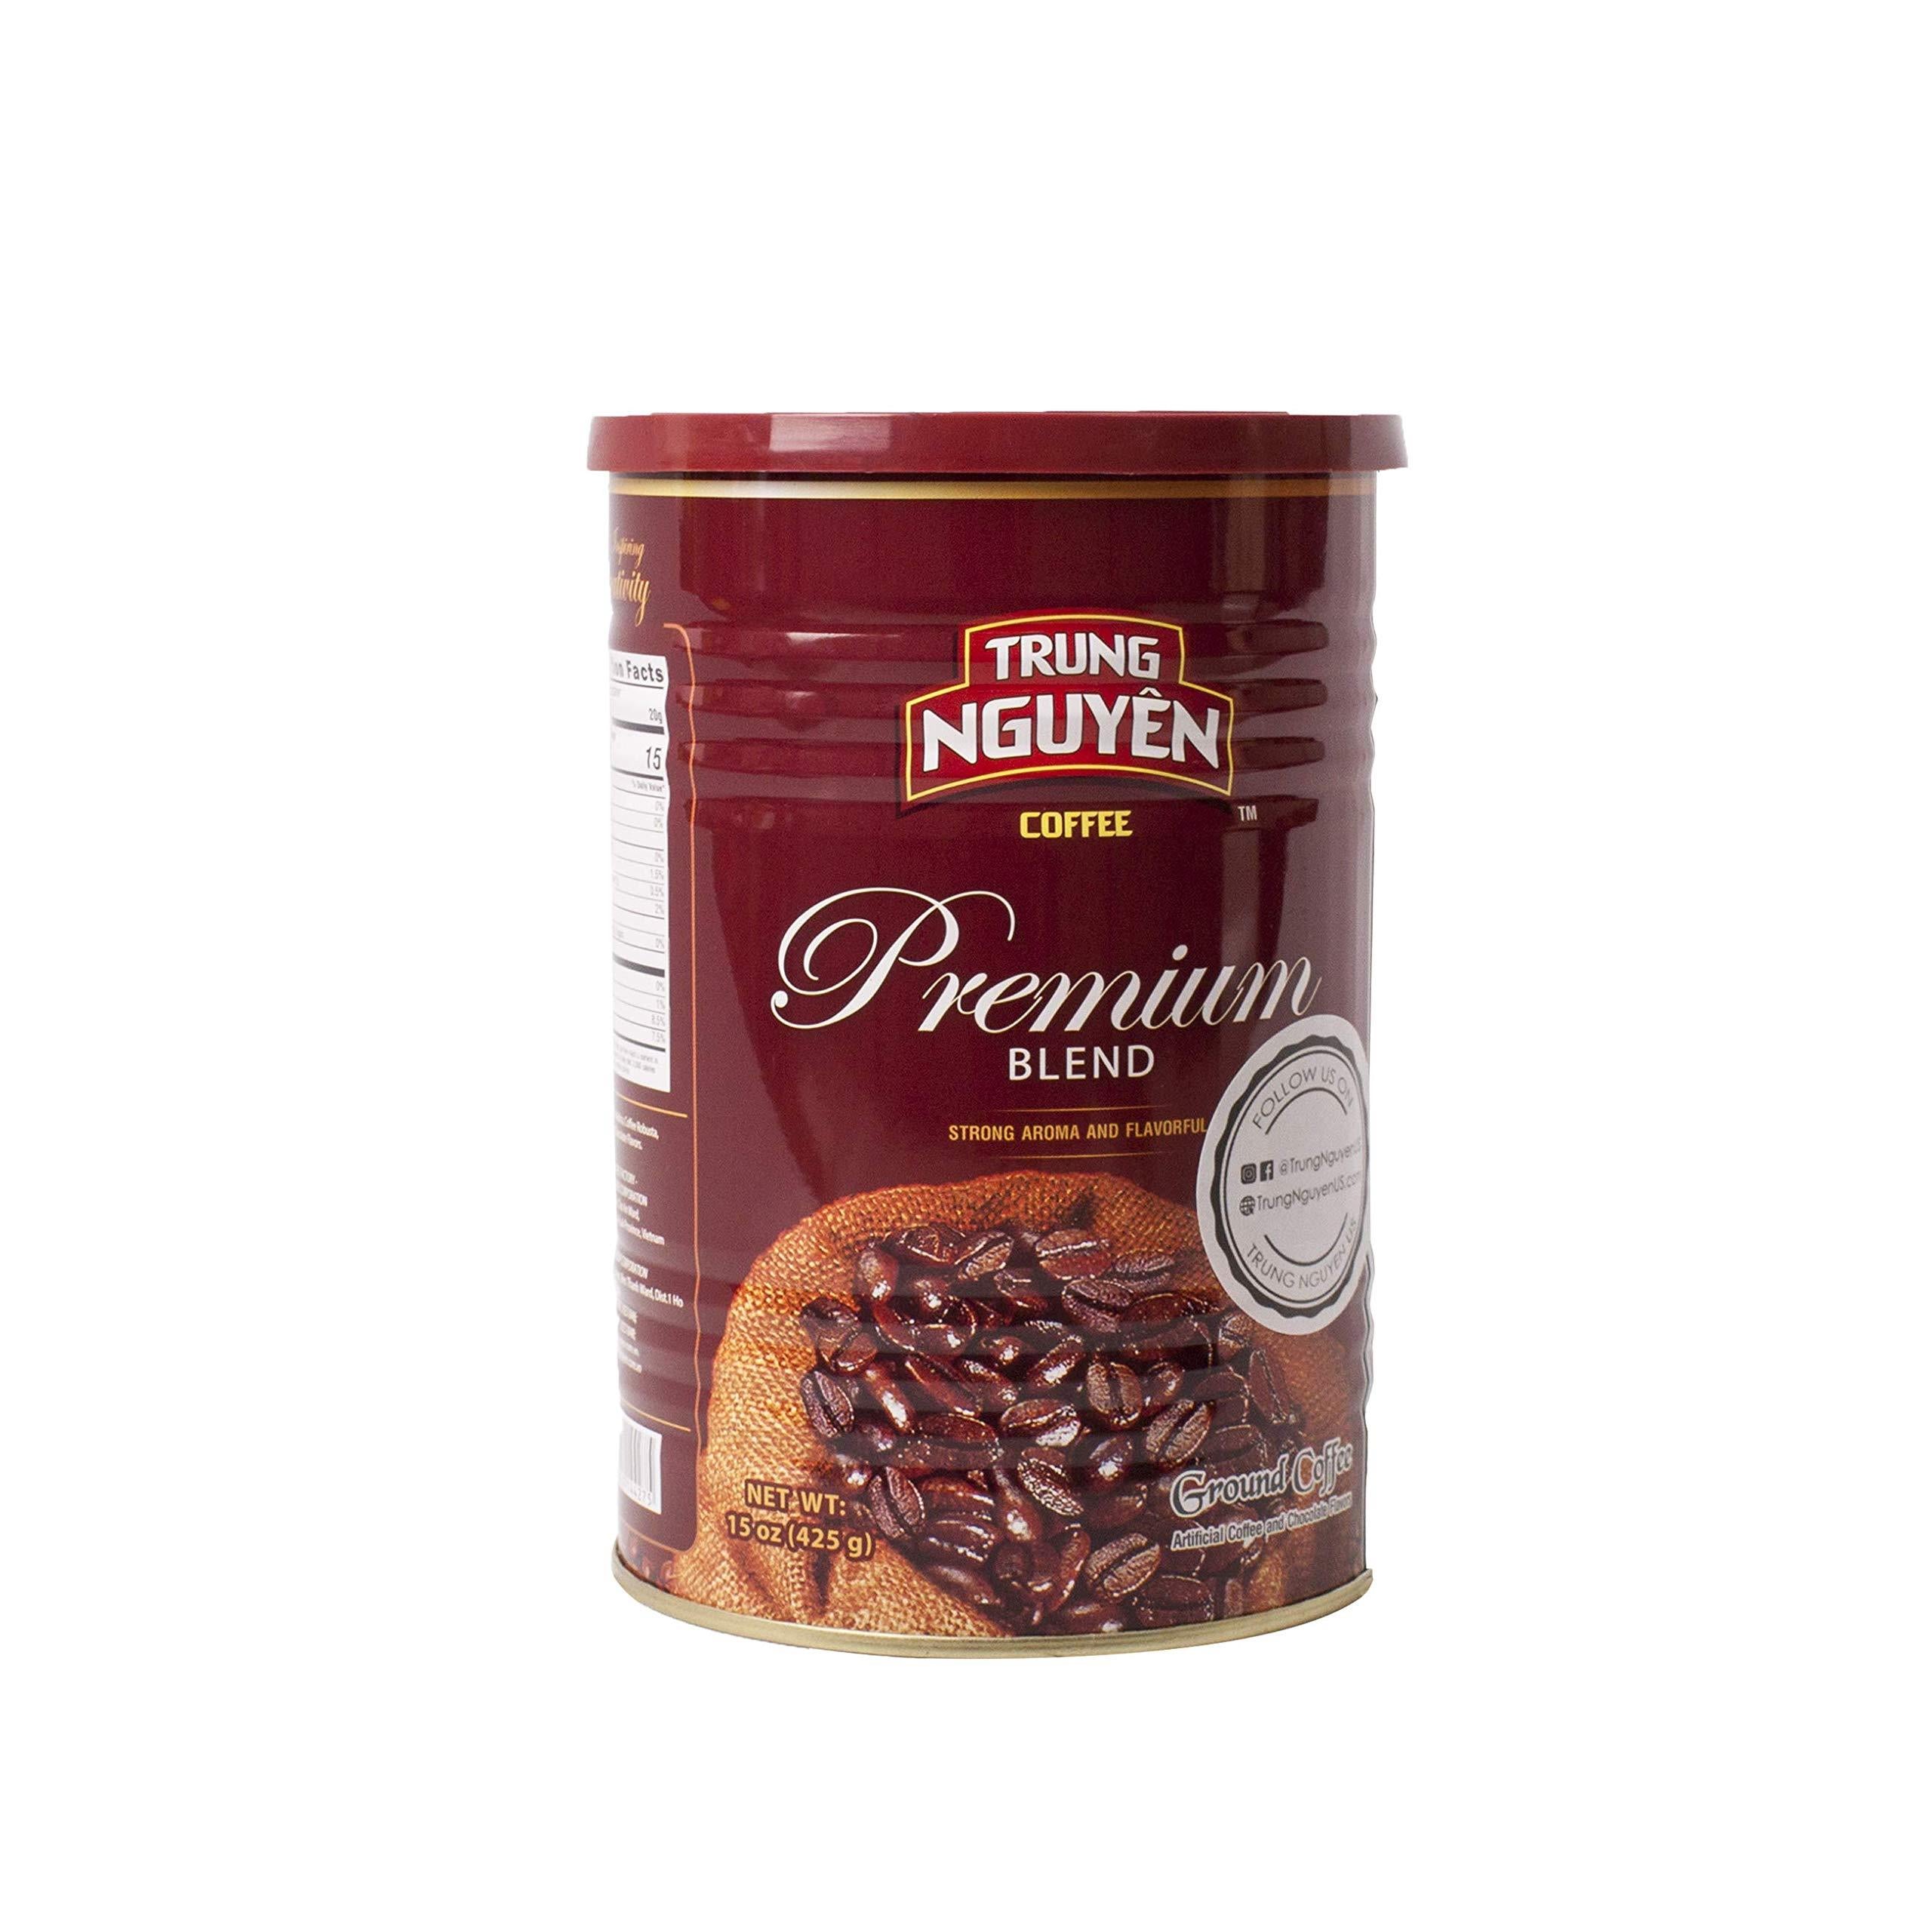 Trung Nguyen Premium Blend, 15 Ounce Can, Vietnamese Coffee Ground, Robusta and Arabica, Medium Roast with Low Acidity